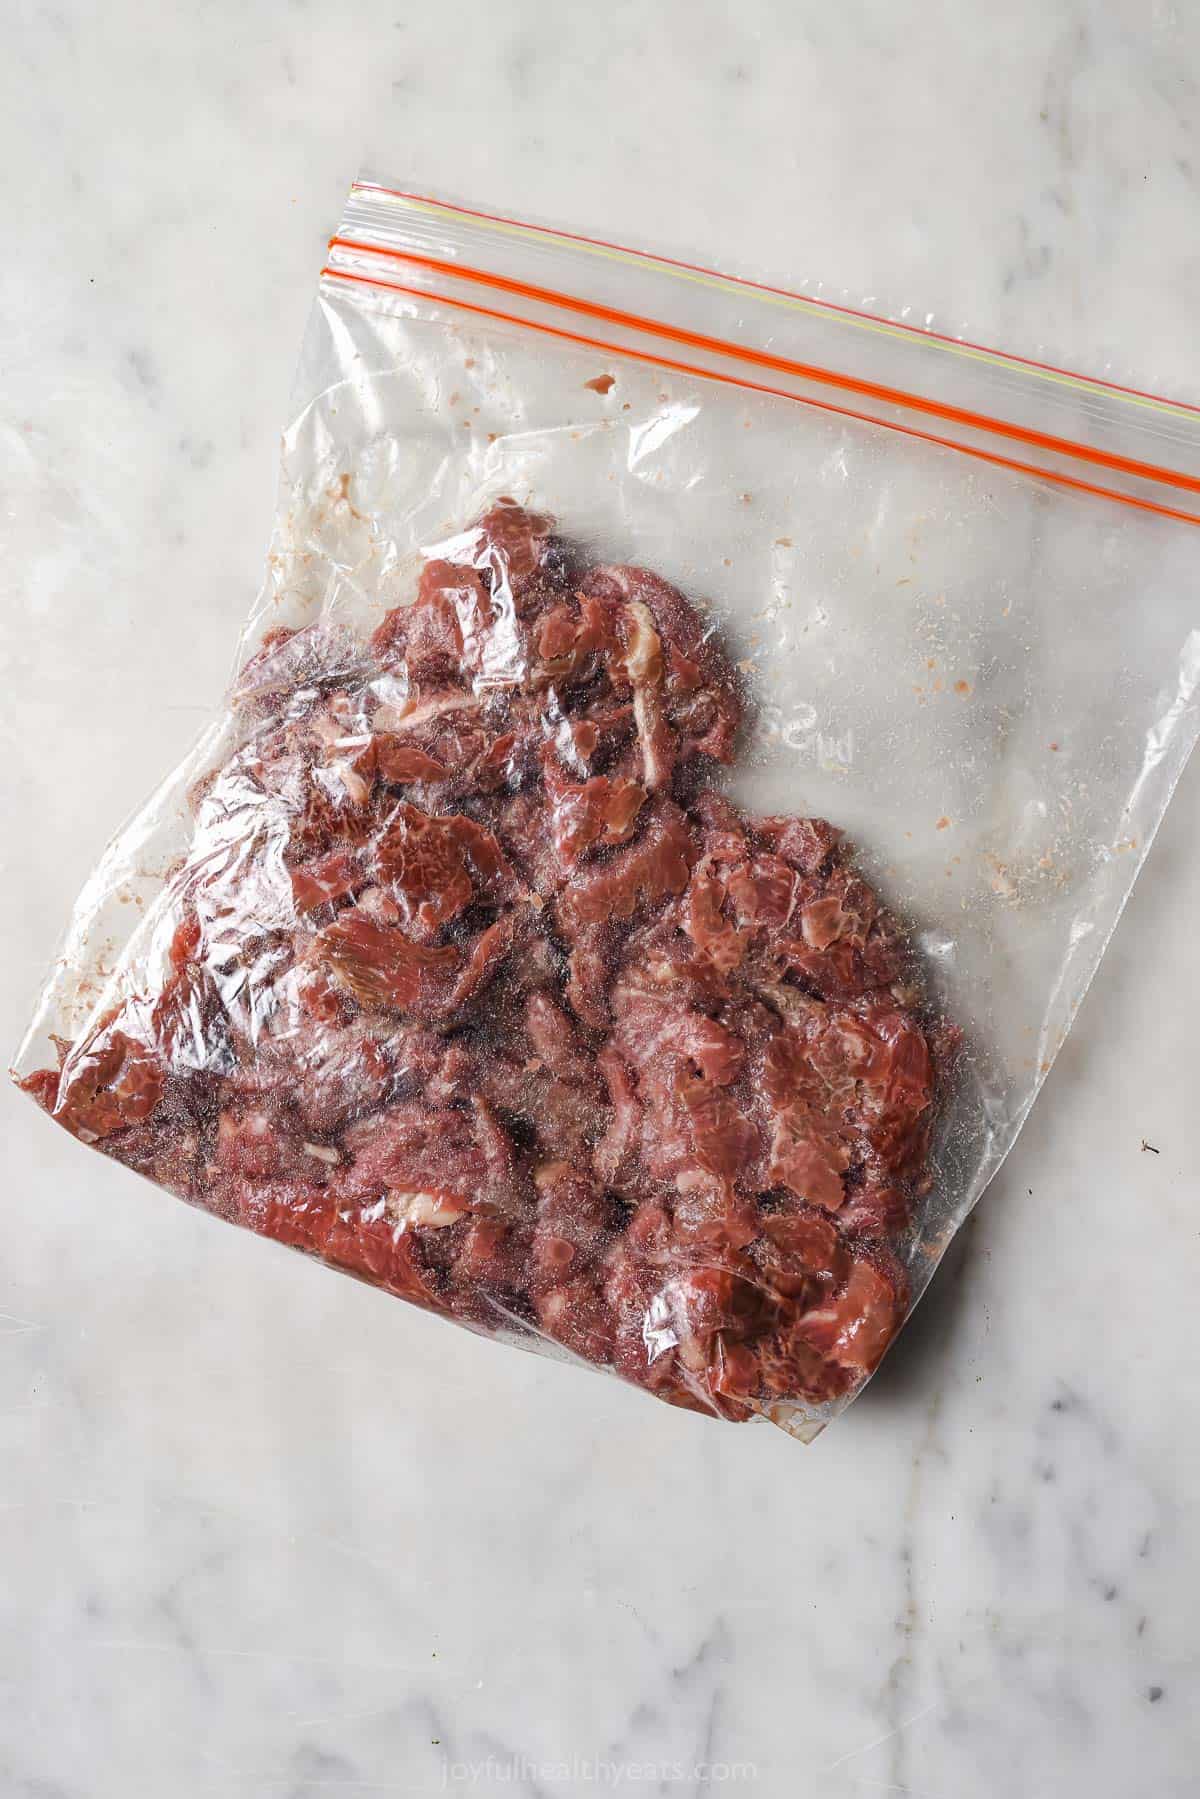 The steak and arrowroot came in a large ziplock bag.